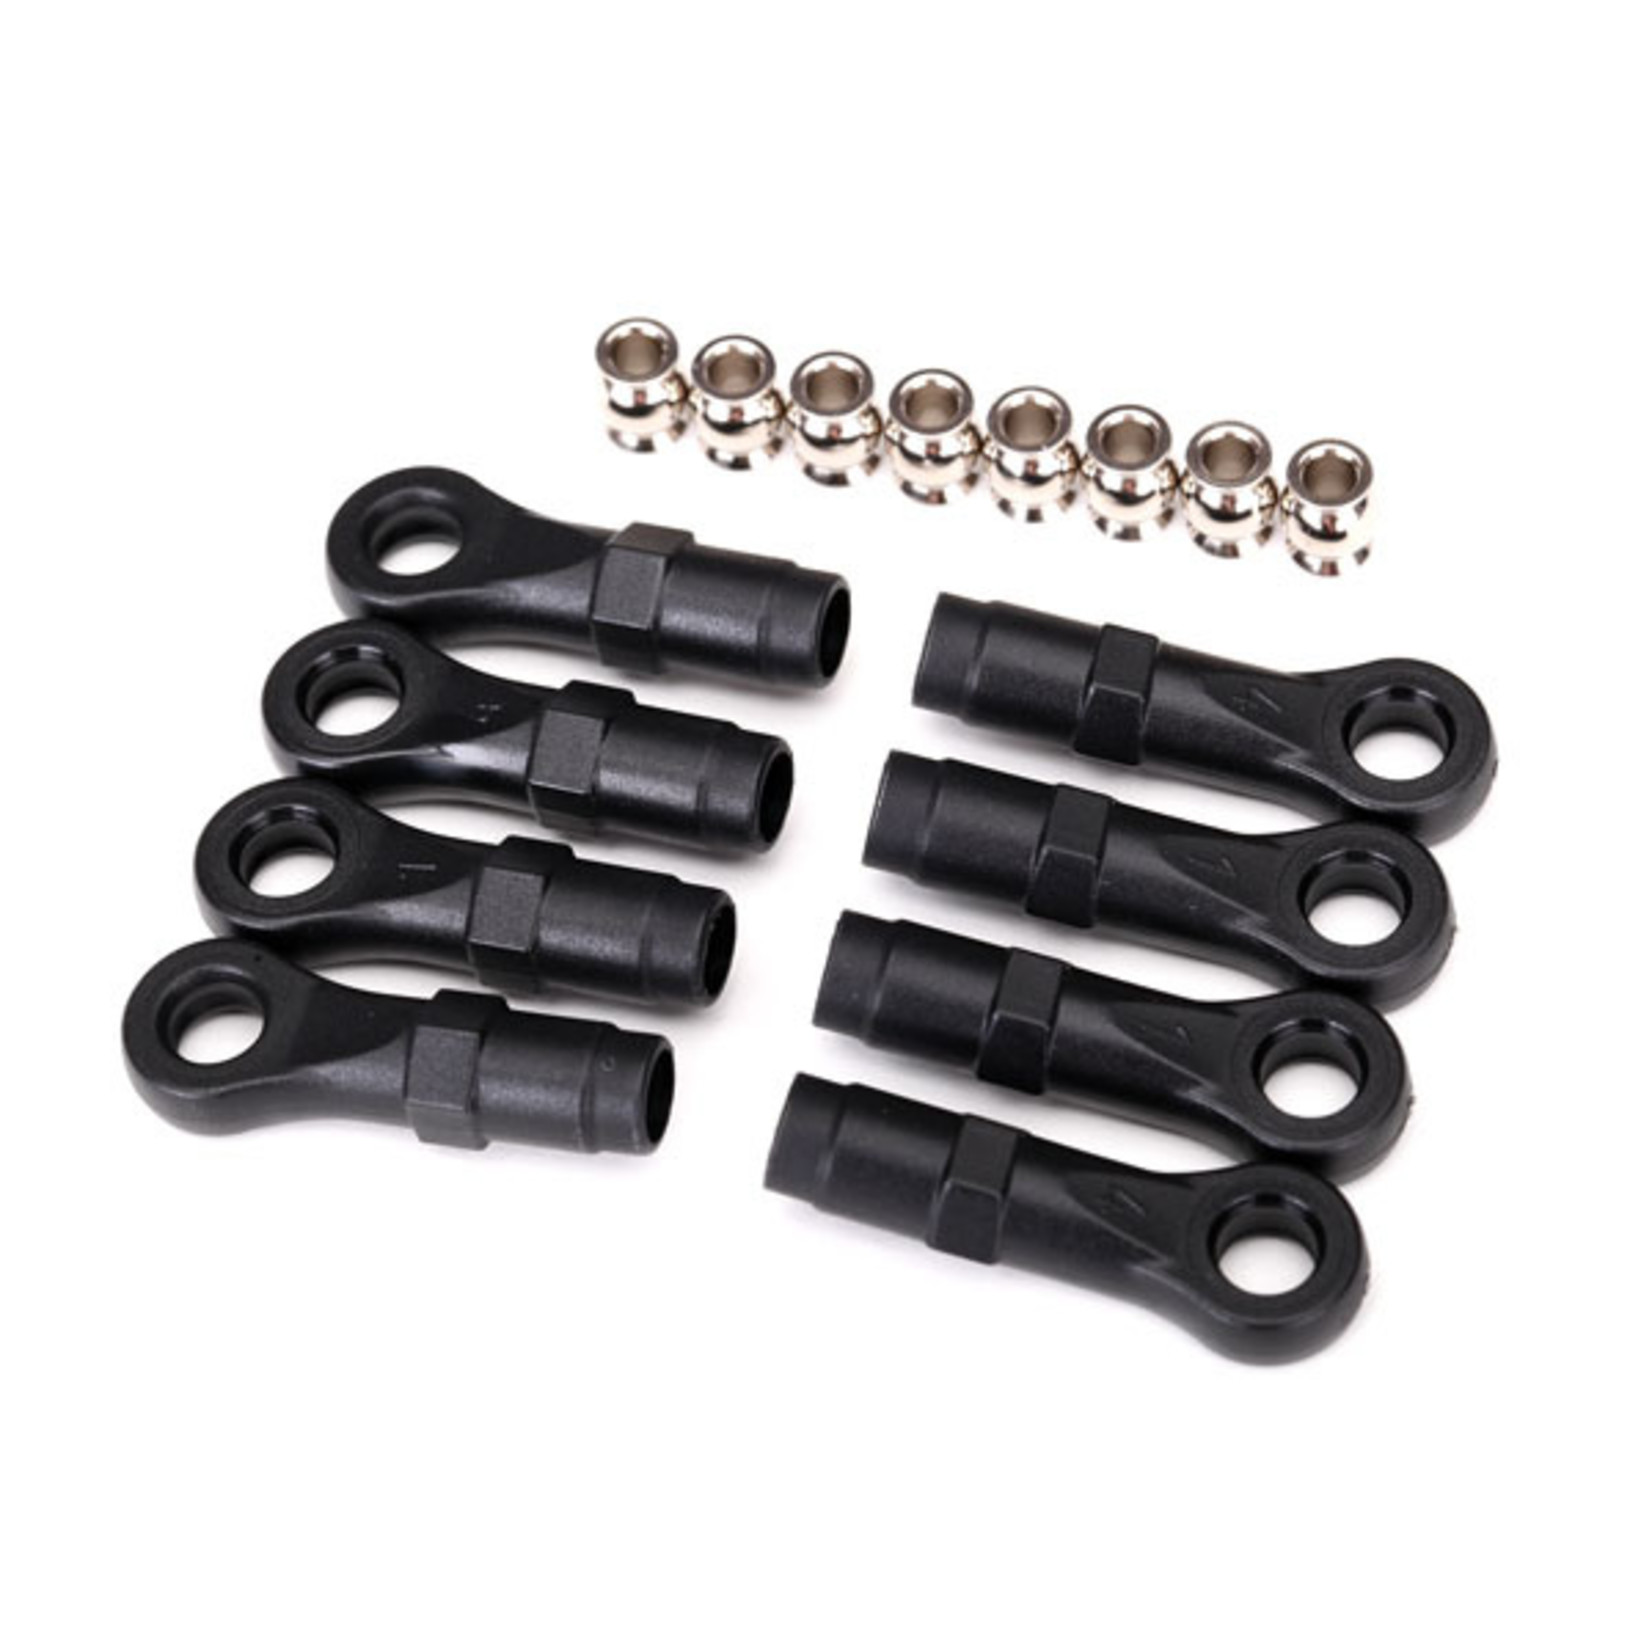 Traxxas 8149 - Rod ends, extended (standard (4), angled (4